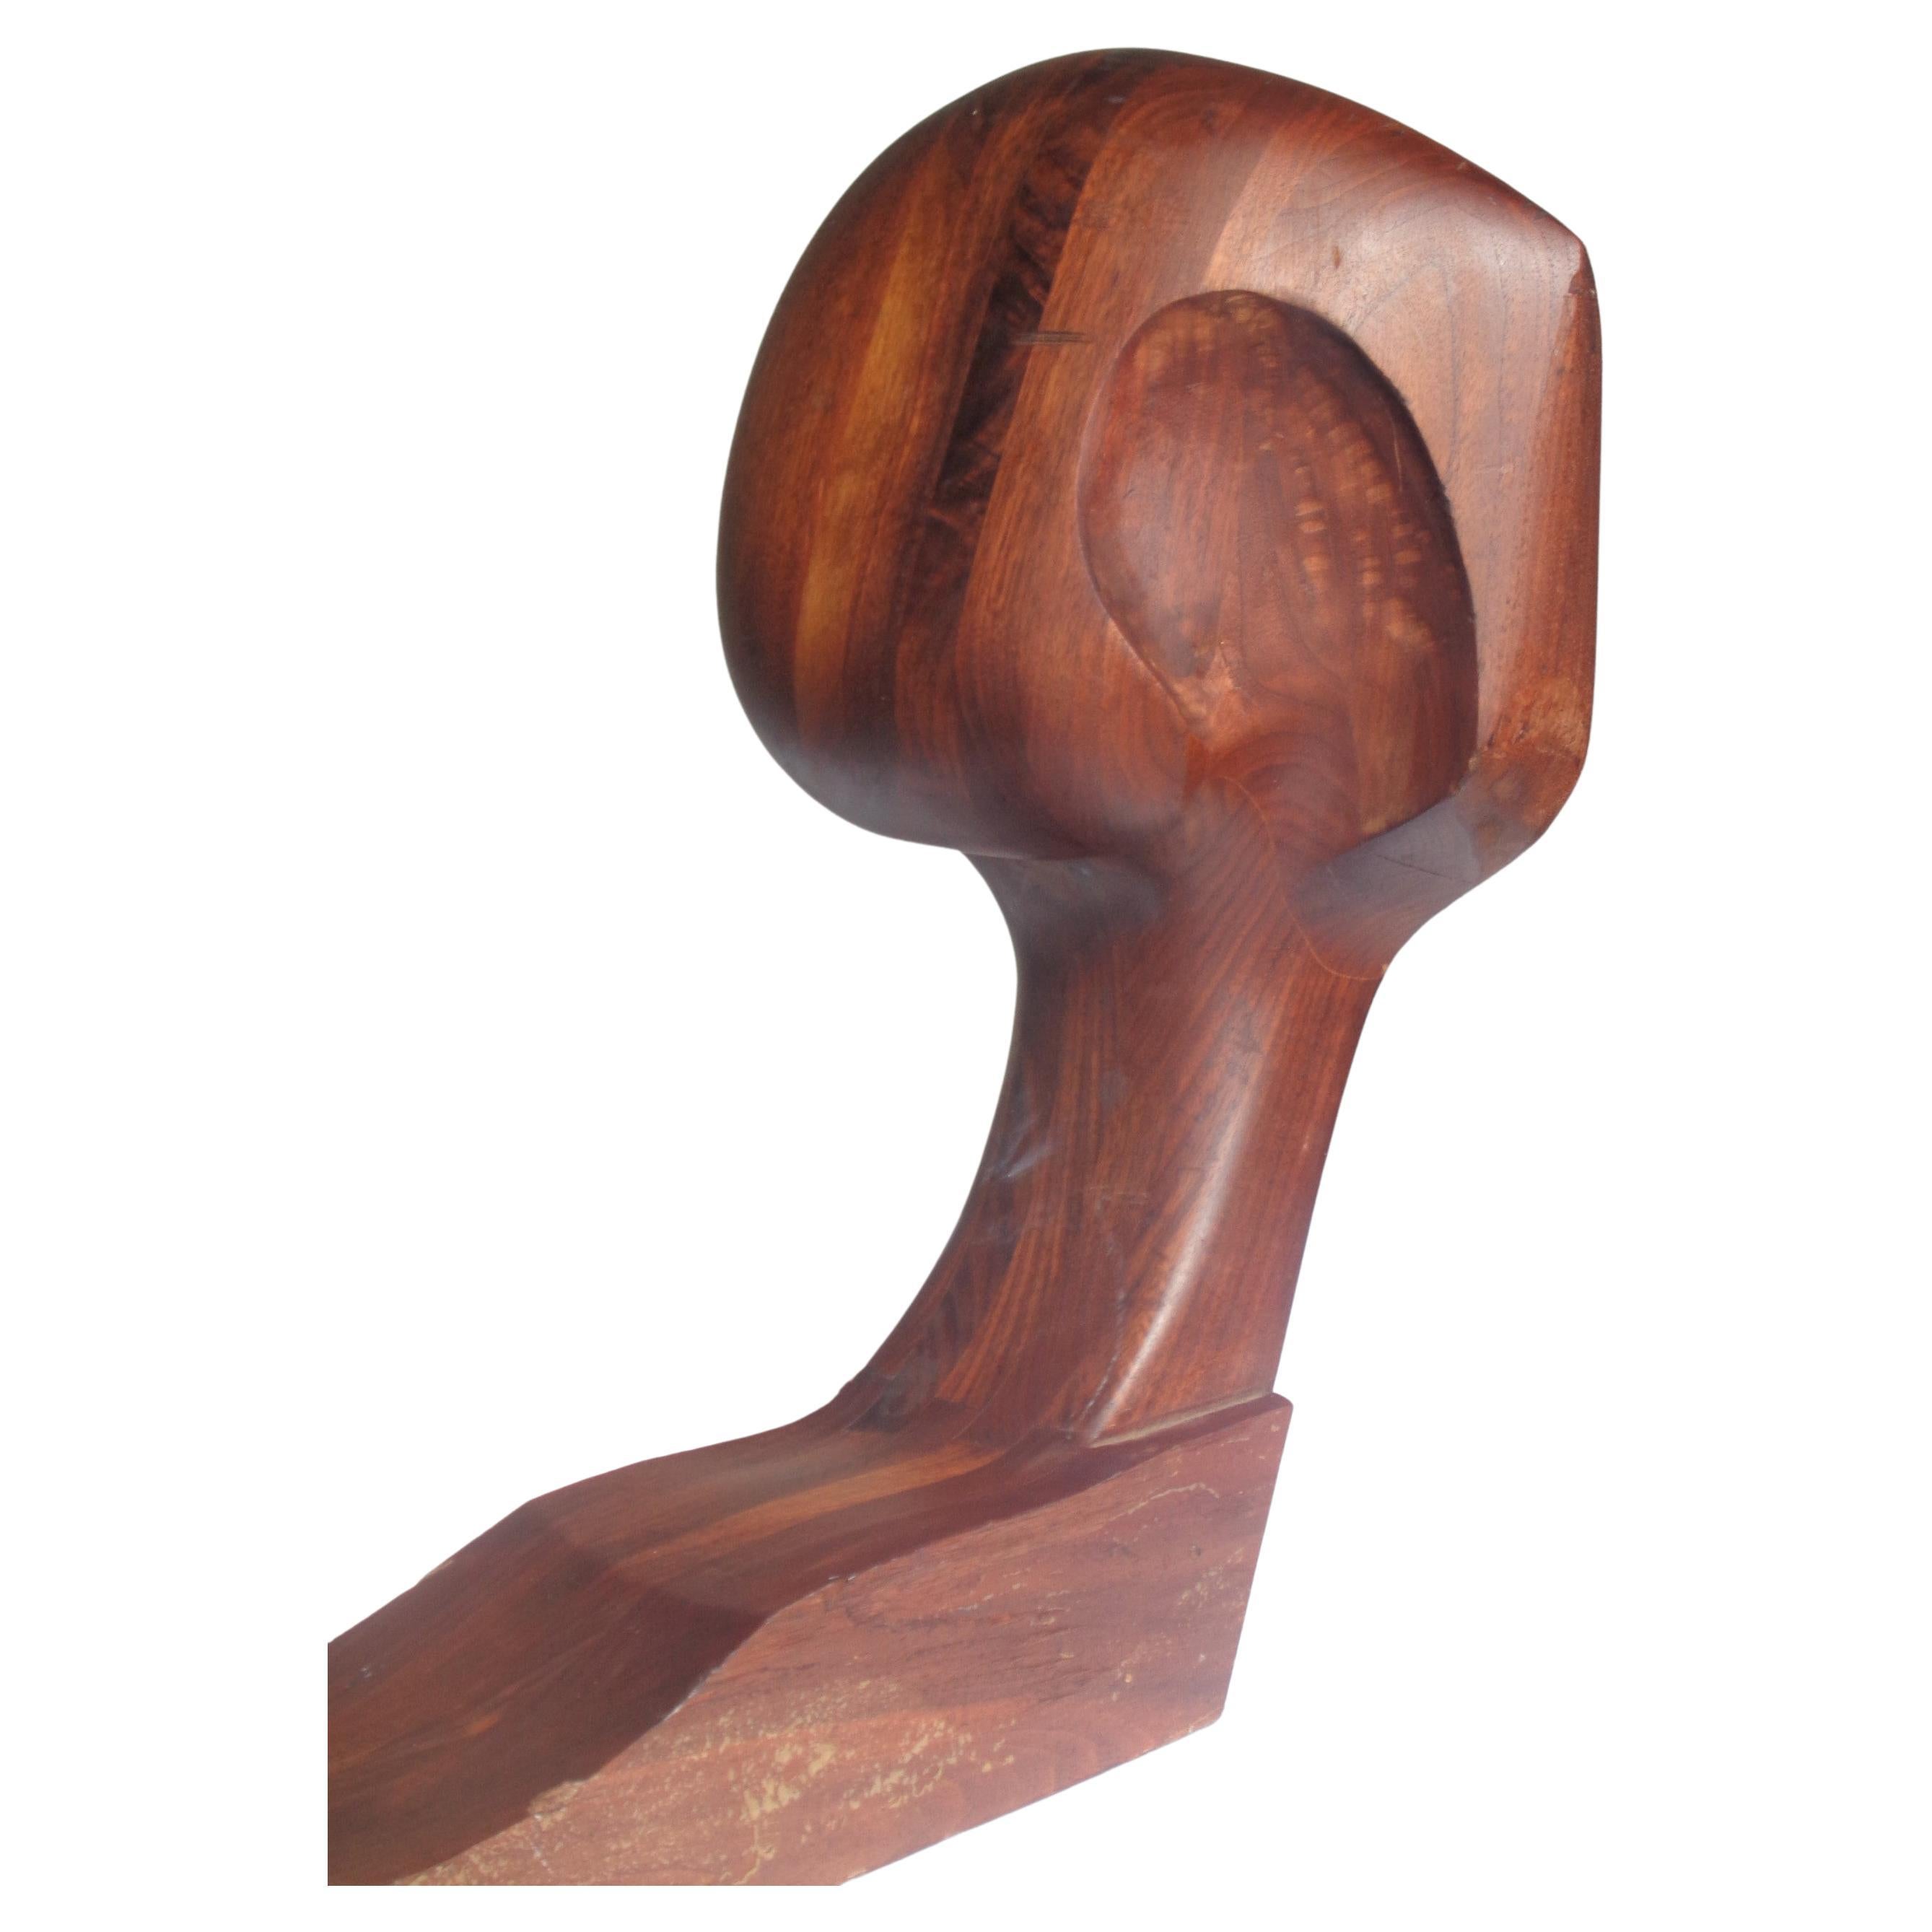 American Craftsman American Studio Craft Movement Abstract Sculpture Wood Bust, 1970-1980 For Sale